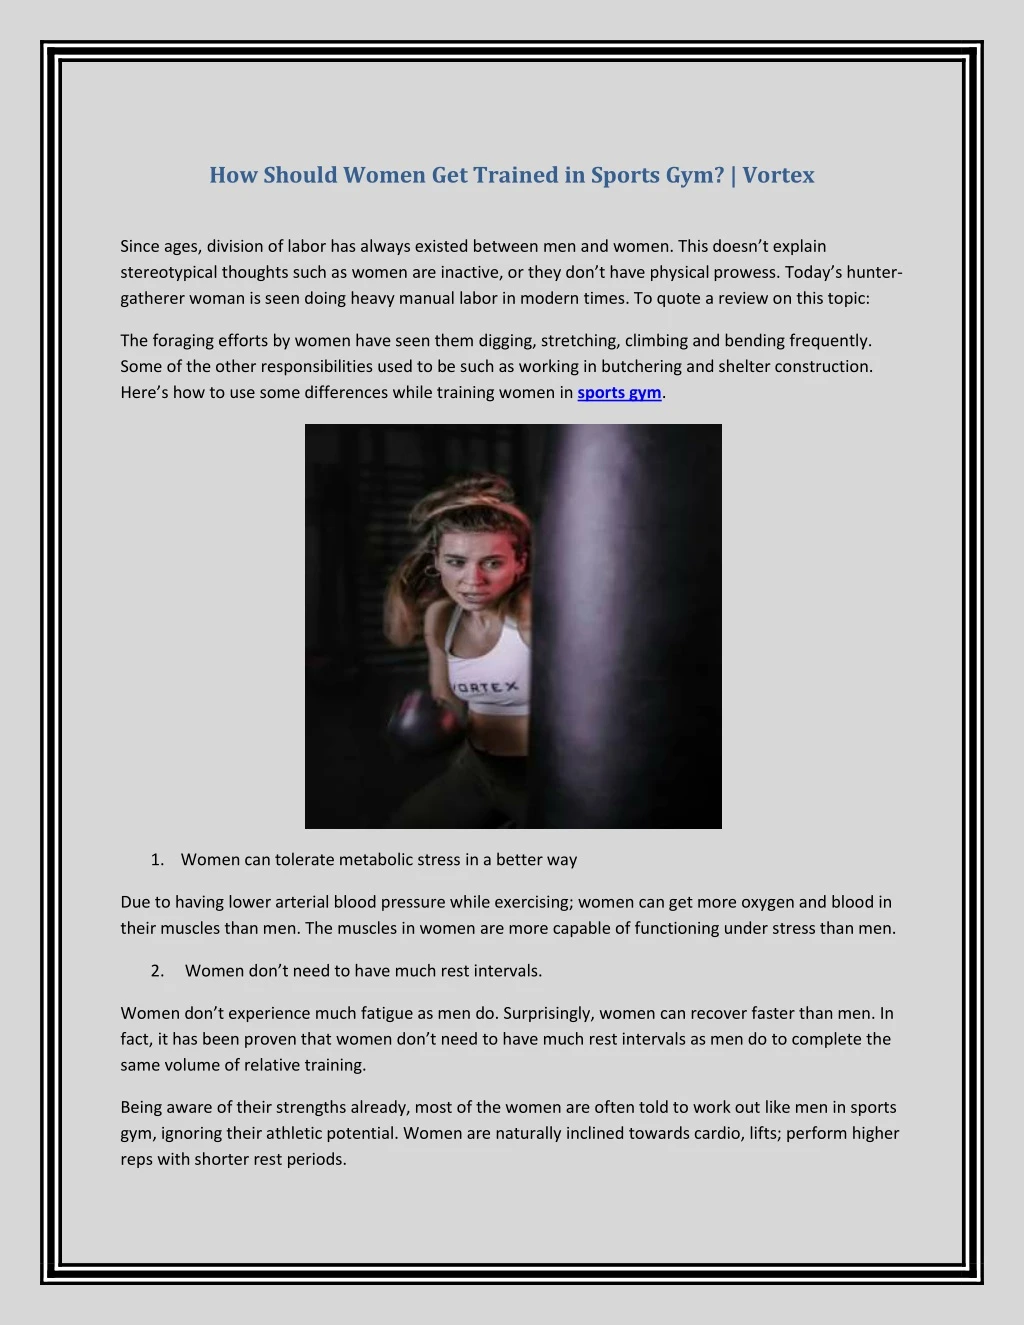 how should women get trained in sports gym vortex